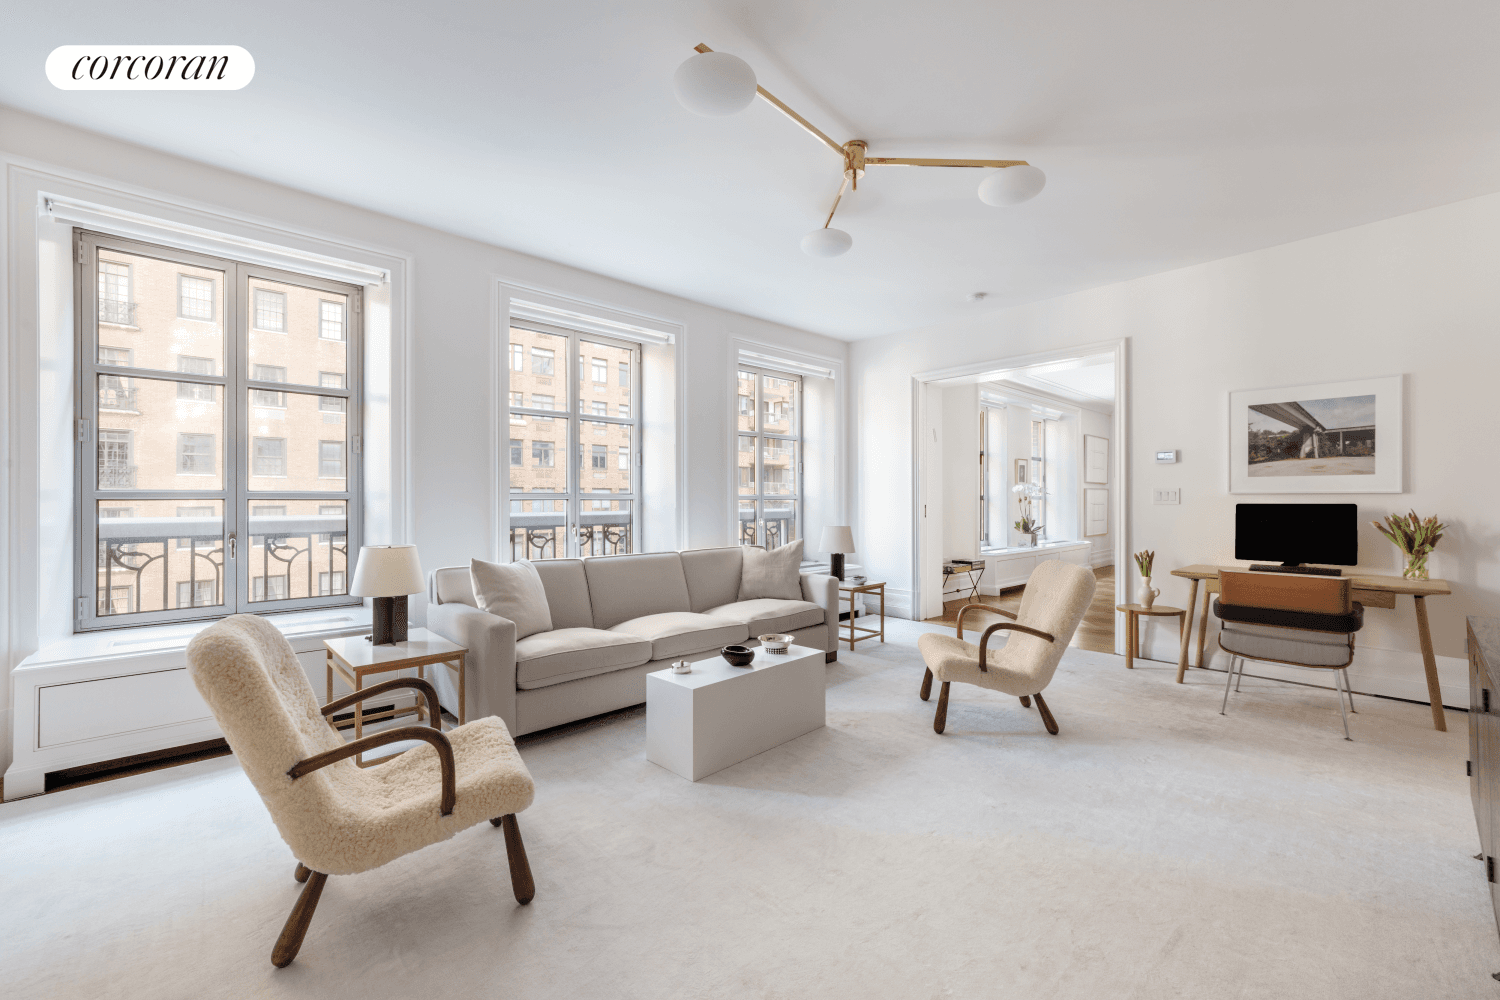 Considered one of the best floorplates in the building, apartment 5W is being offered for the first time at 135 West 79 Street.